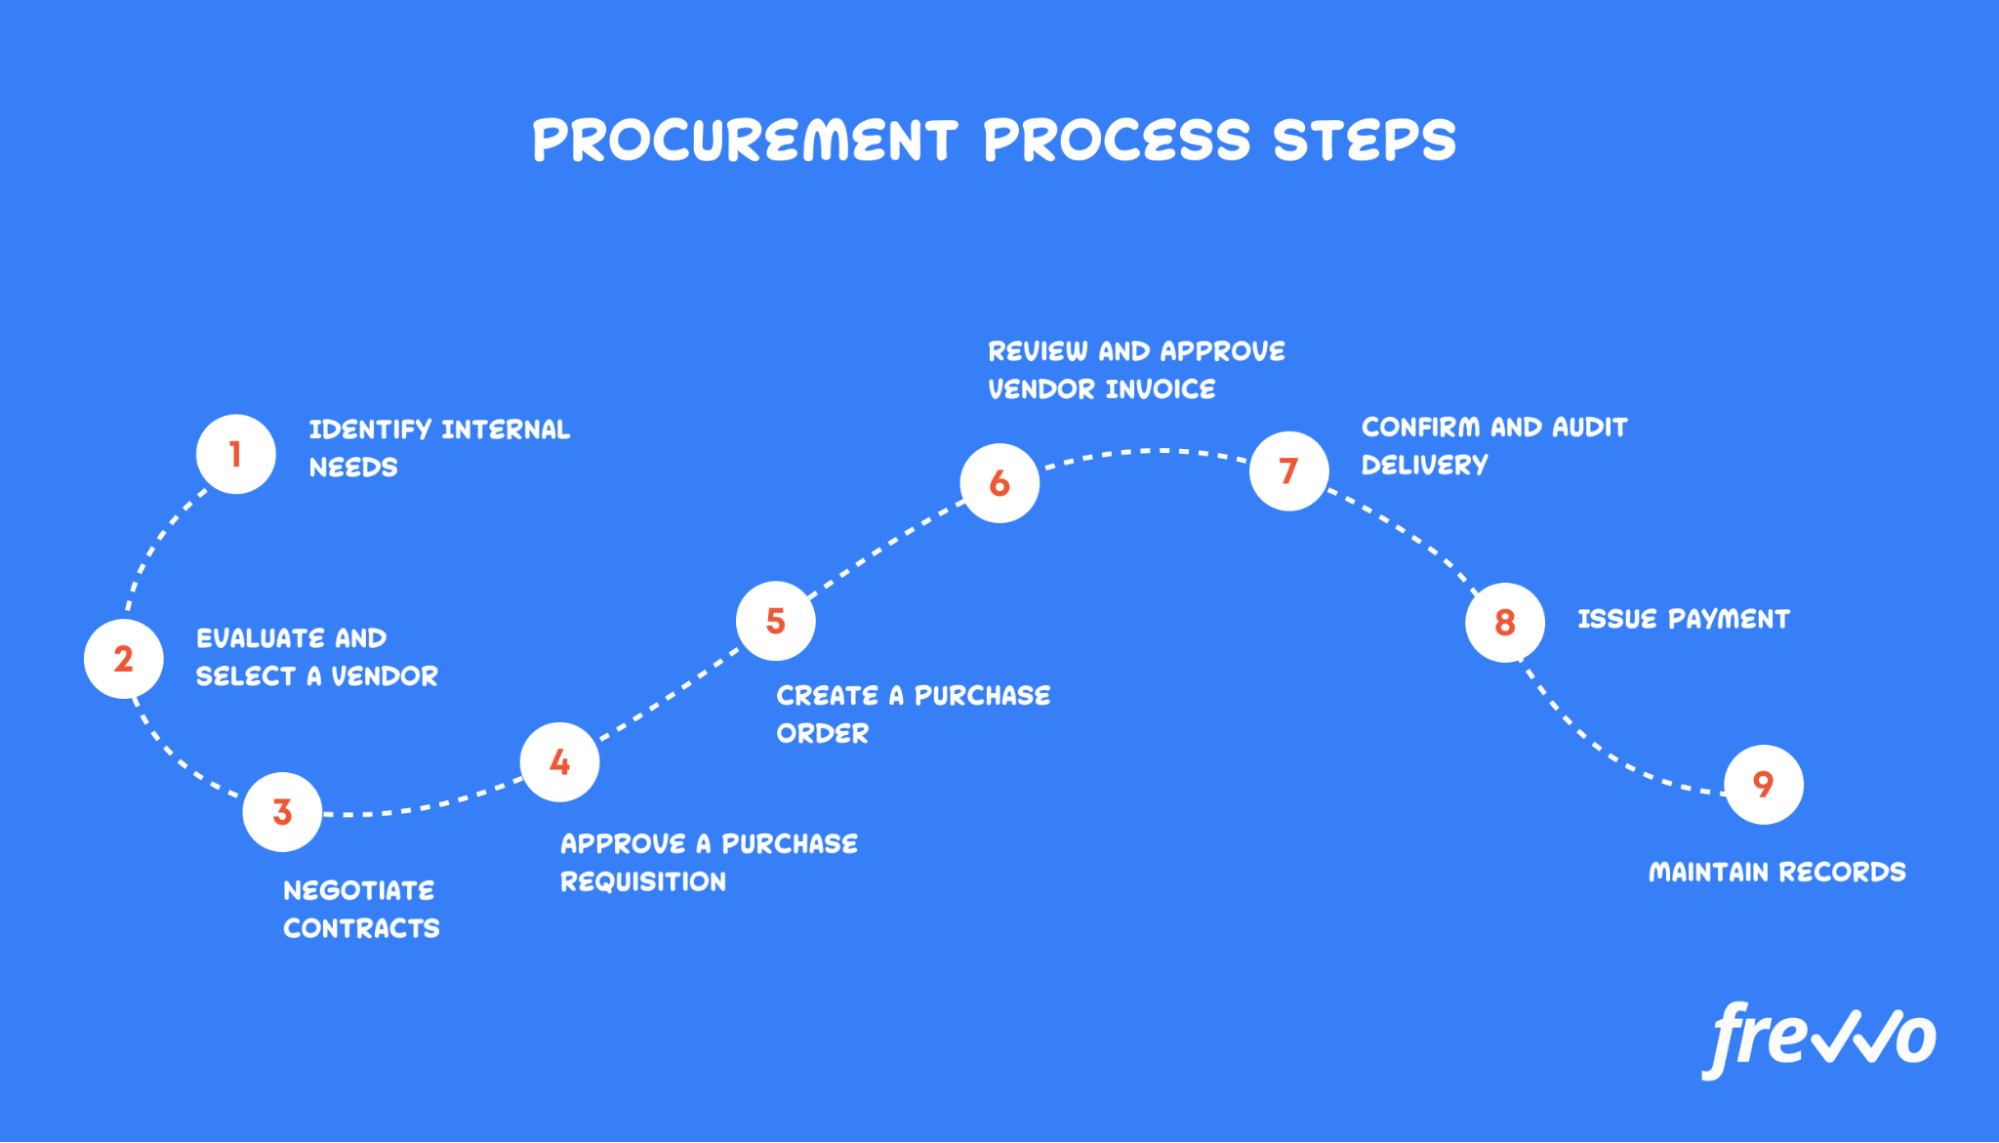 Steps in the procurement process